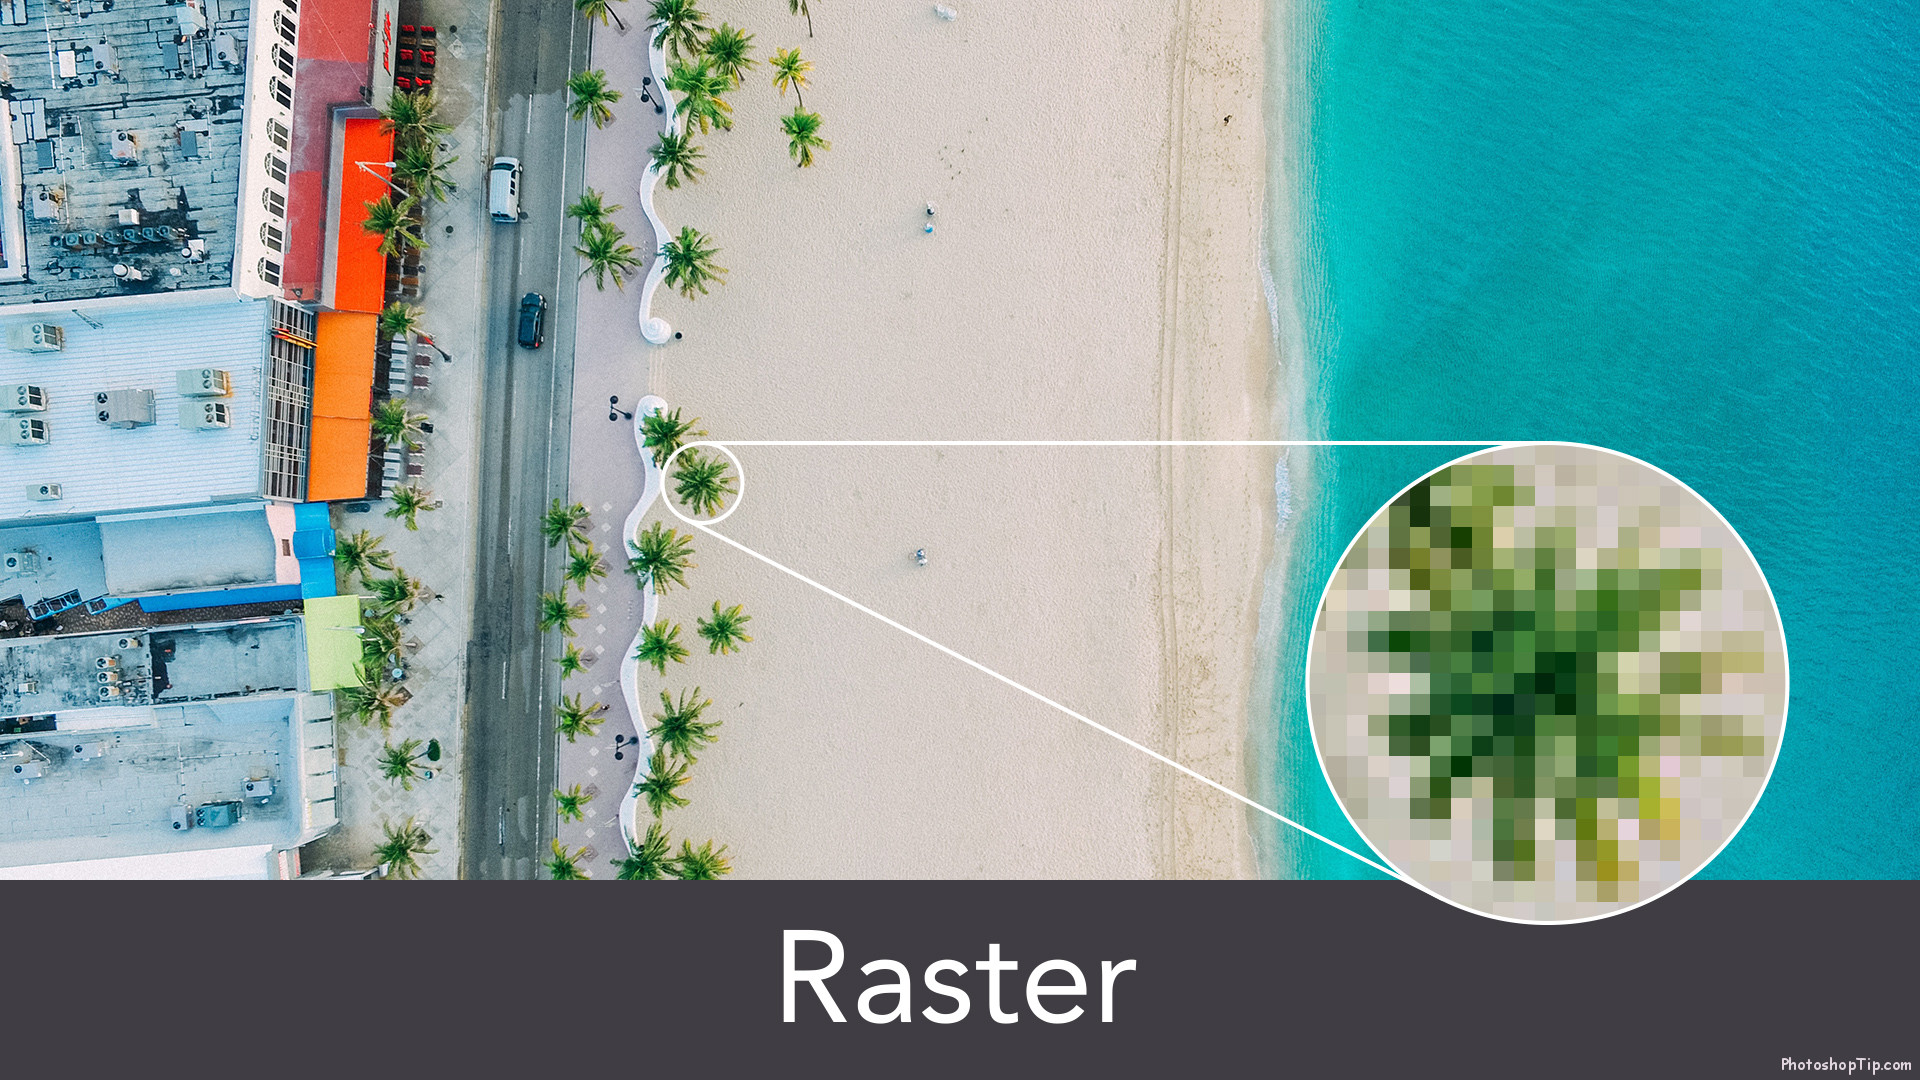 difference between raster and vector